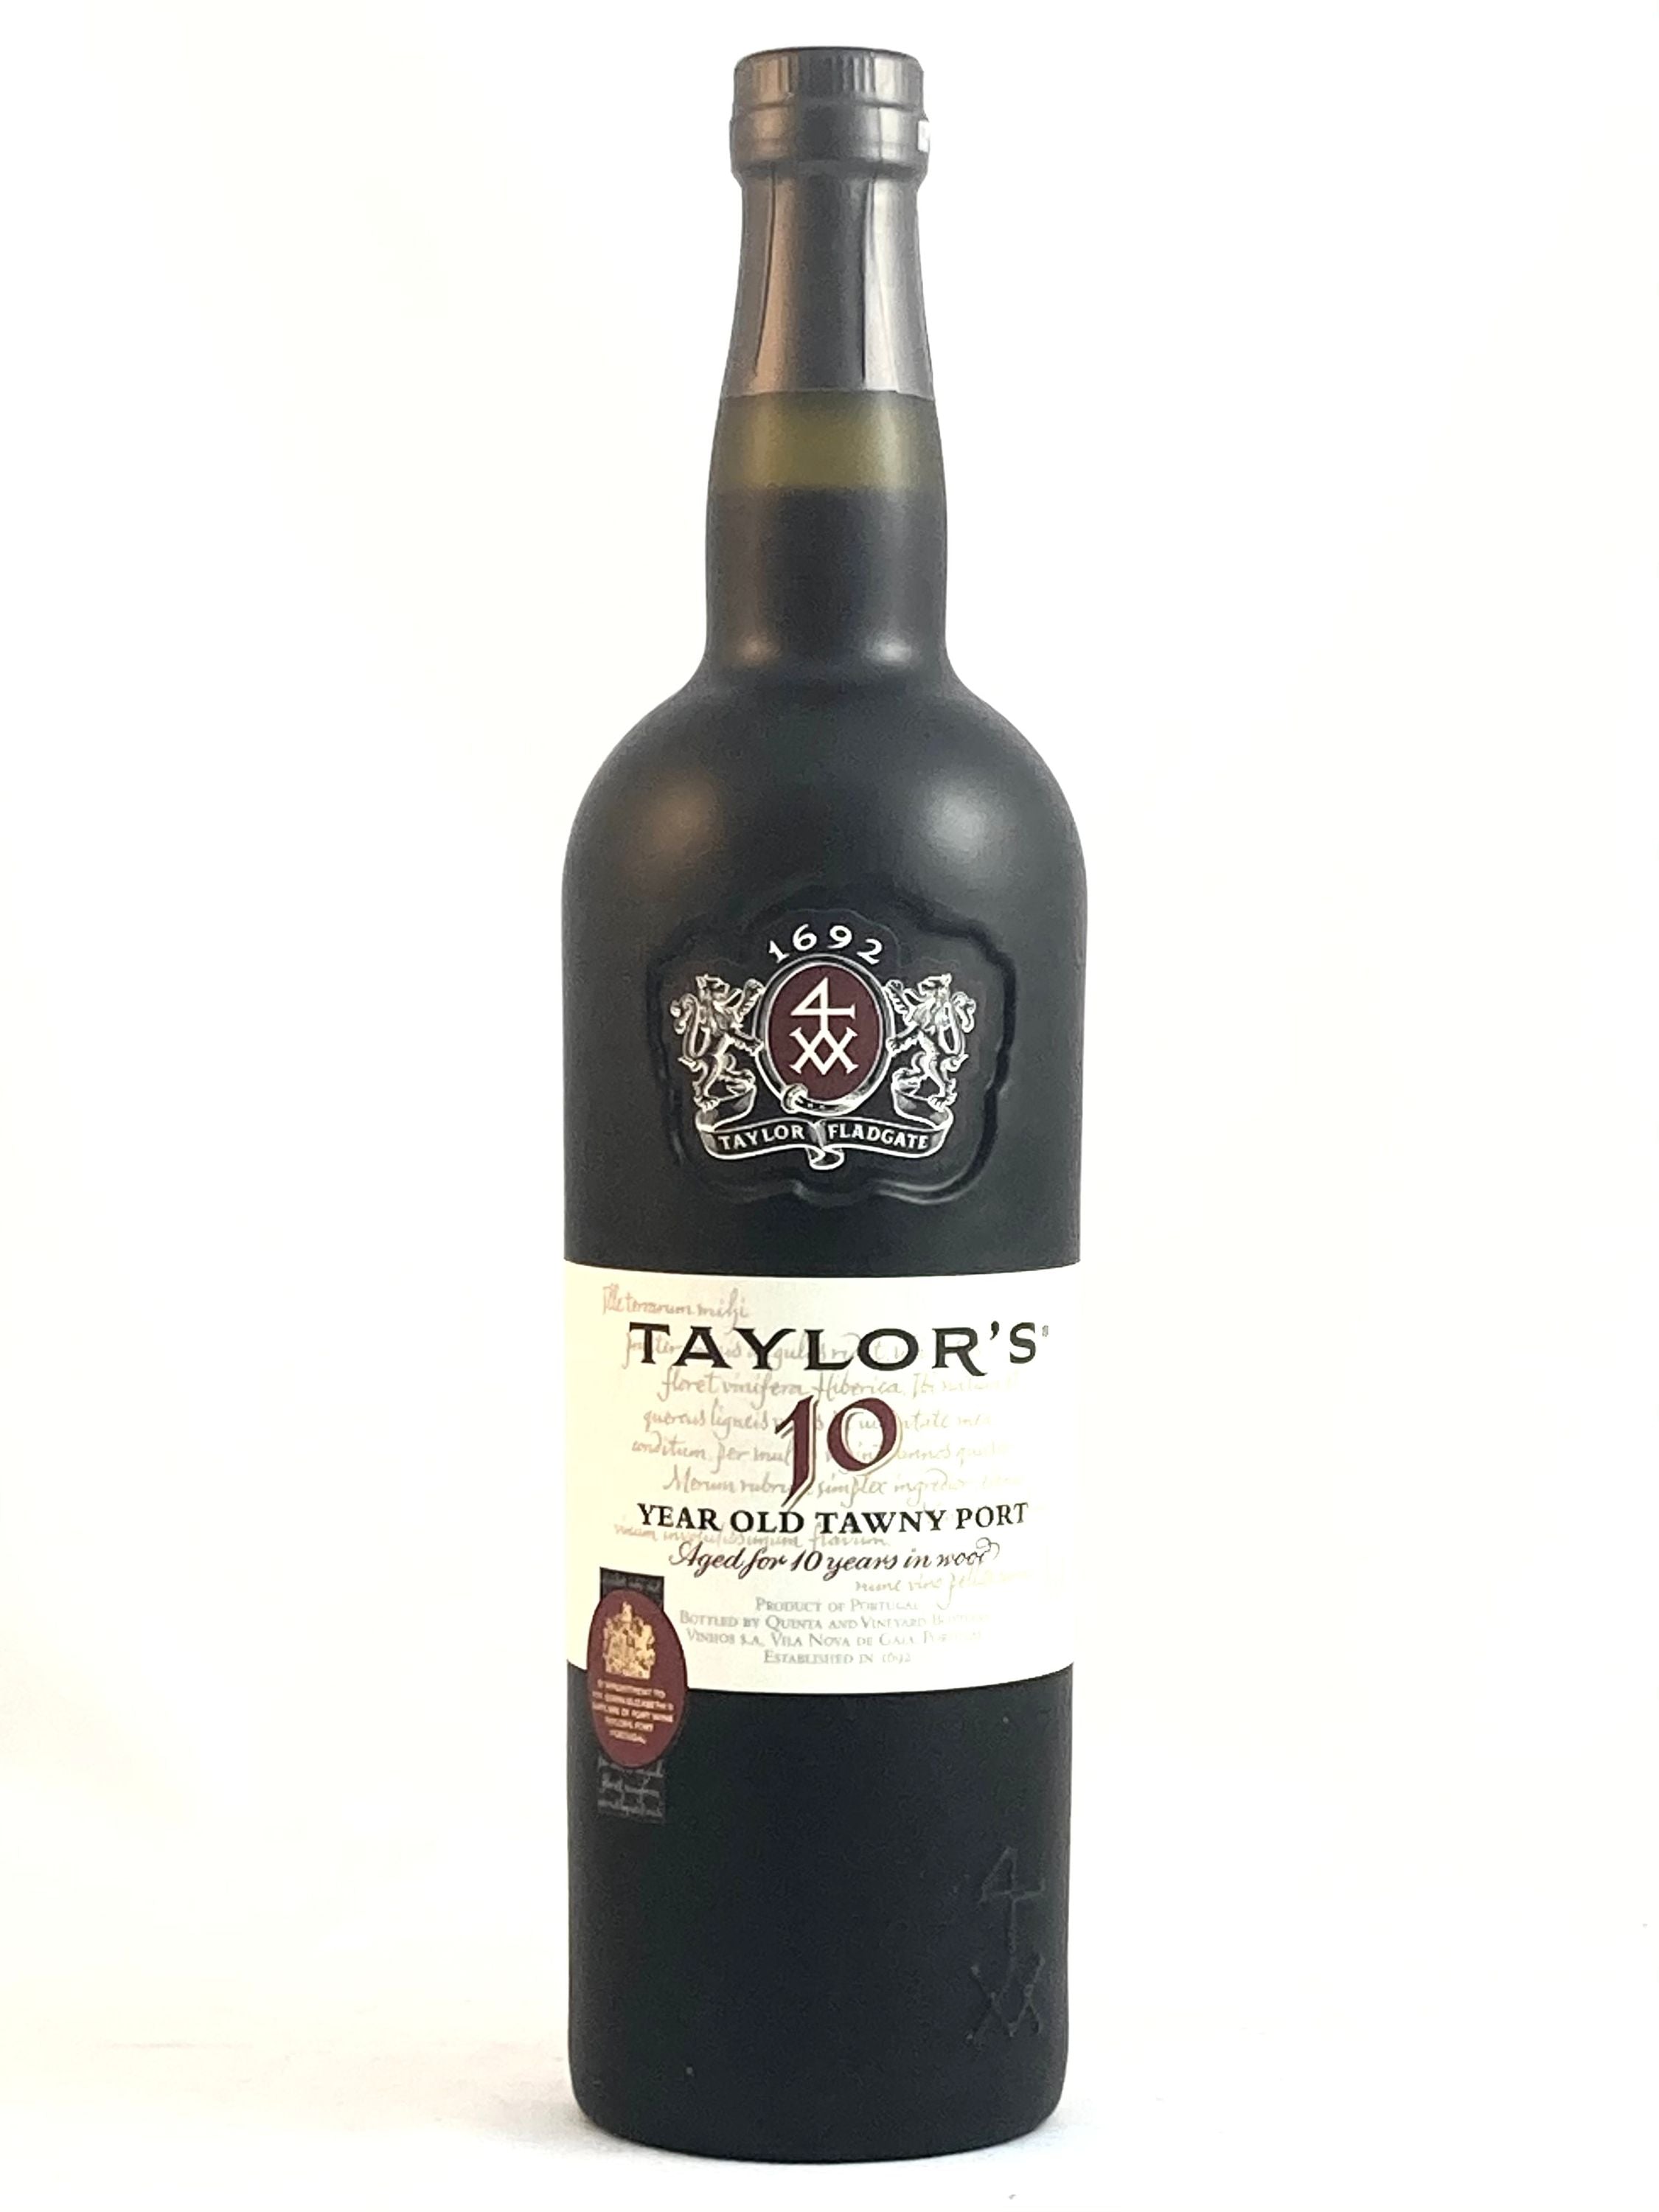 Taylor's Port Tawny 10 years 0.75l, alc. 20% by volume